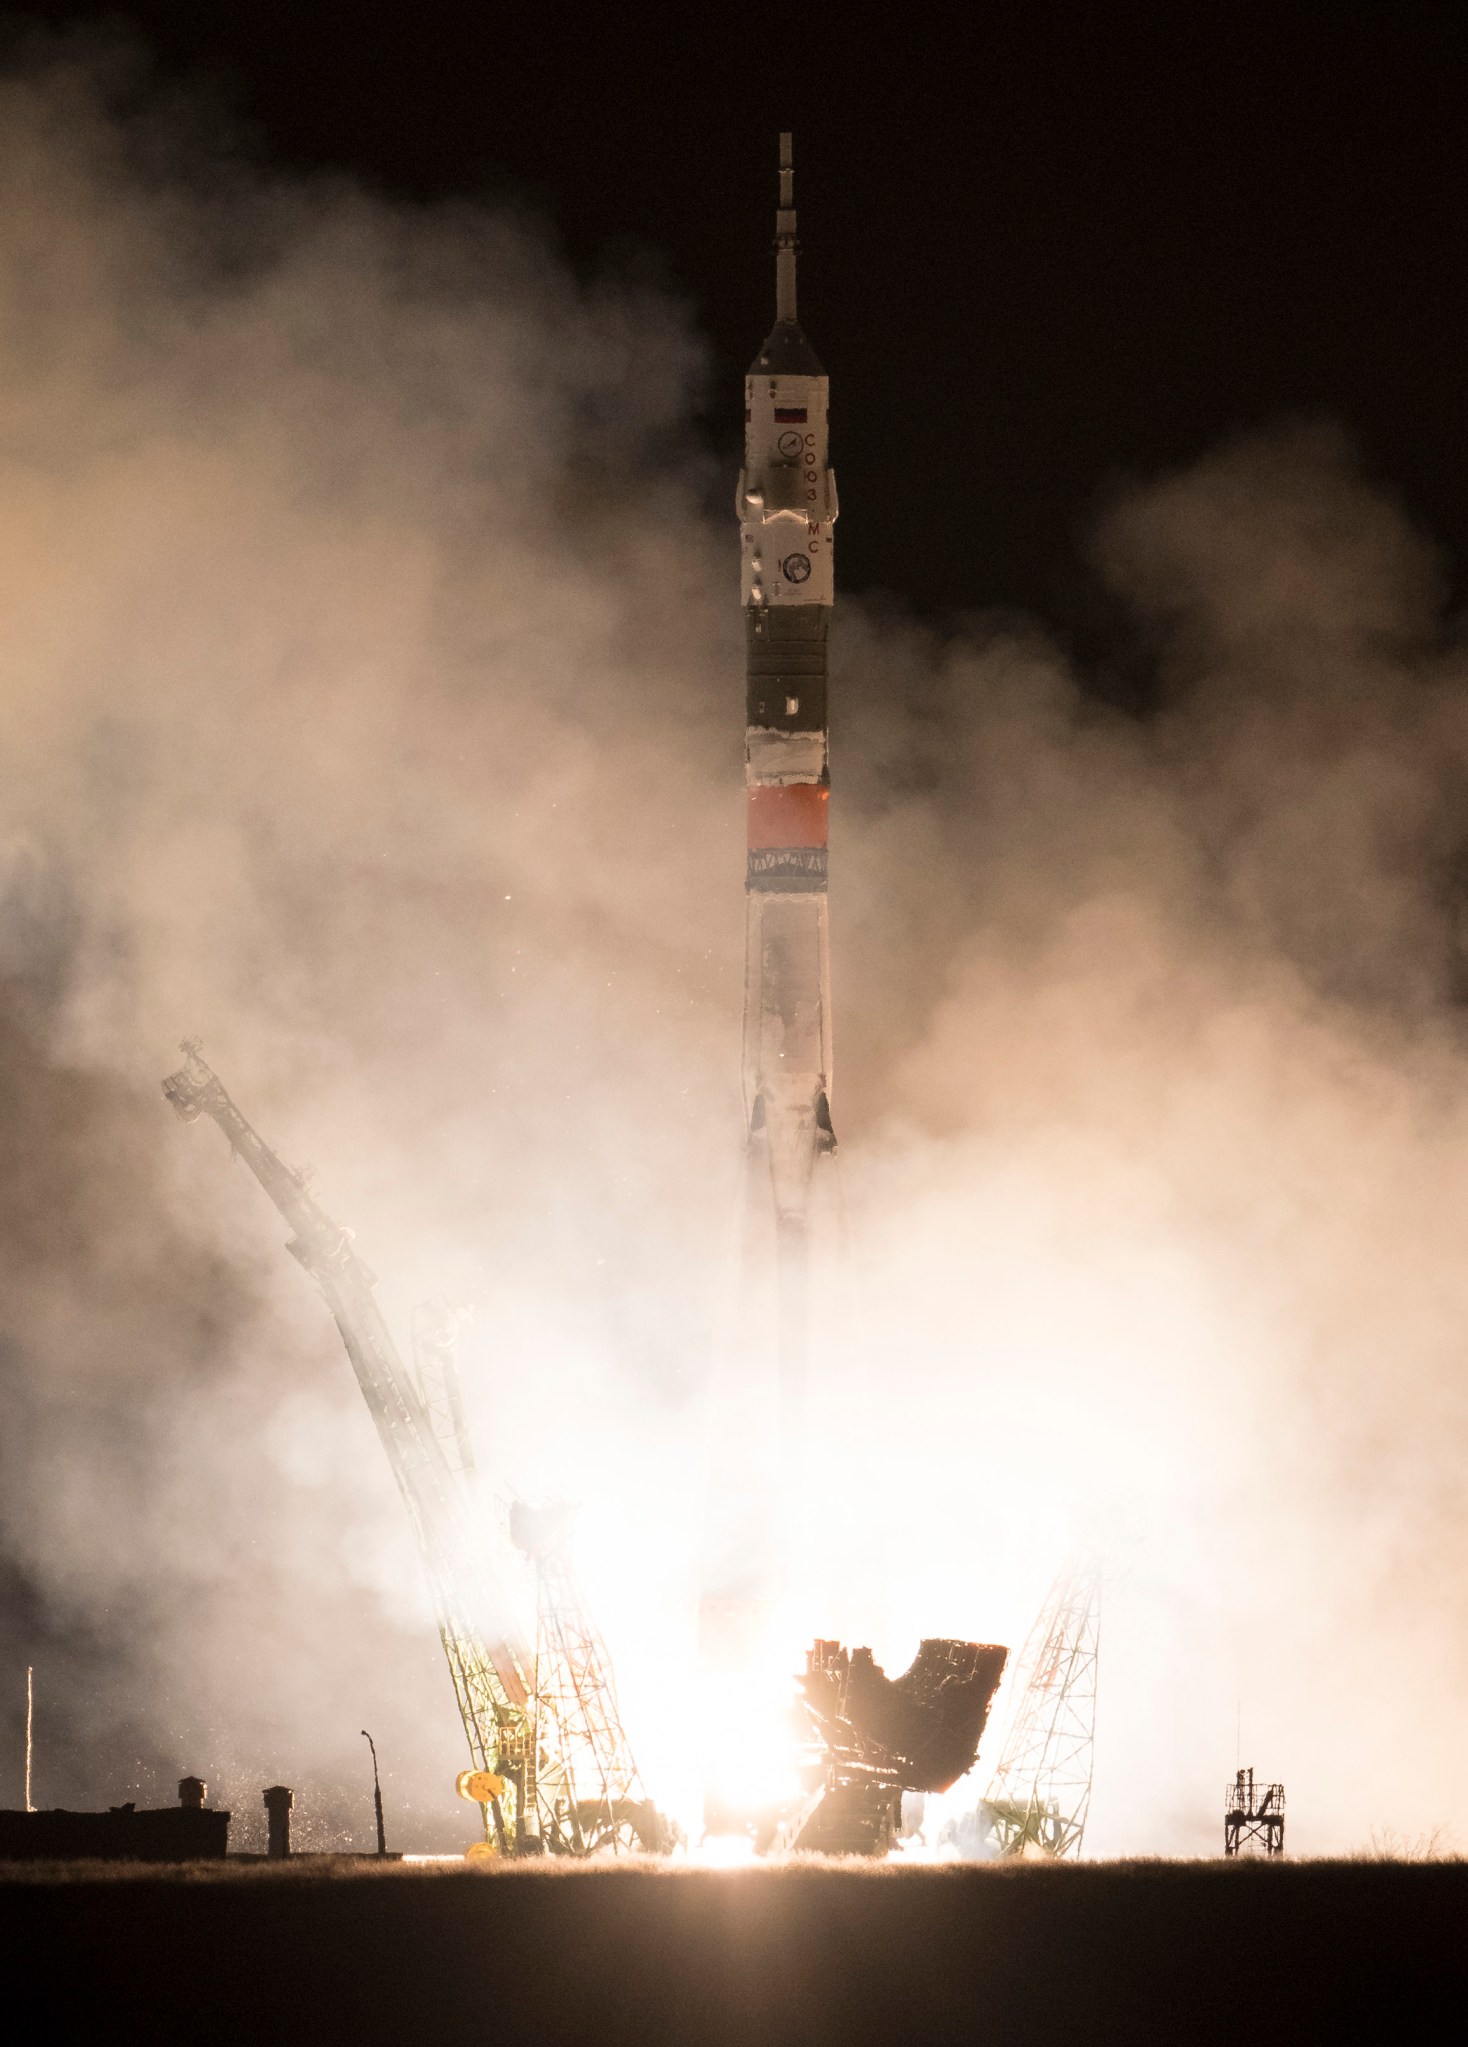 NASA astronauts Drew Feustel and Ricky Arnold, and Oleg Artemyev of the Russian space agency Roscosmos, launch March 21, 2018